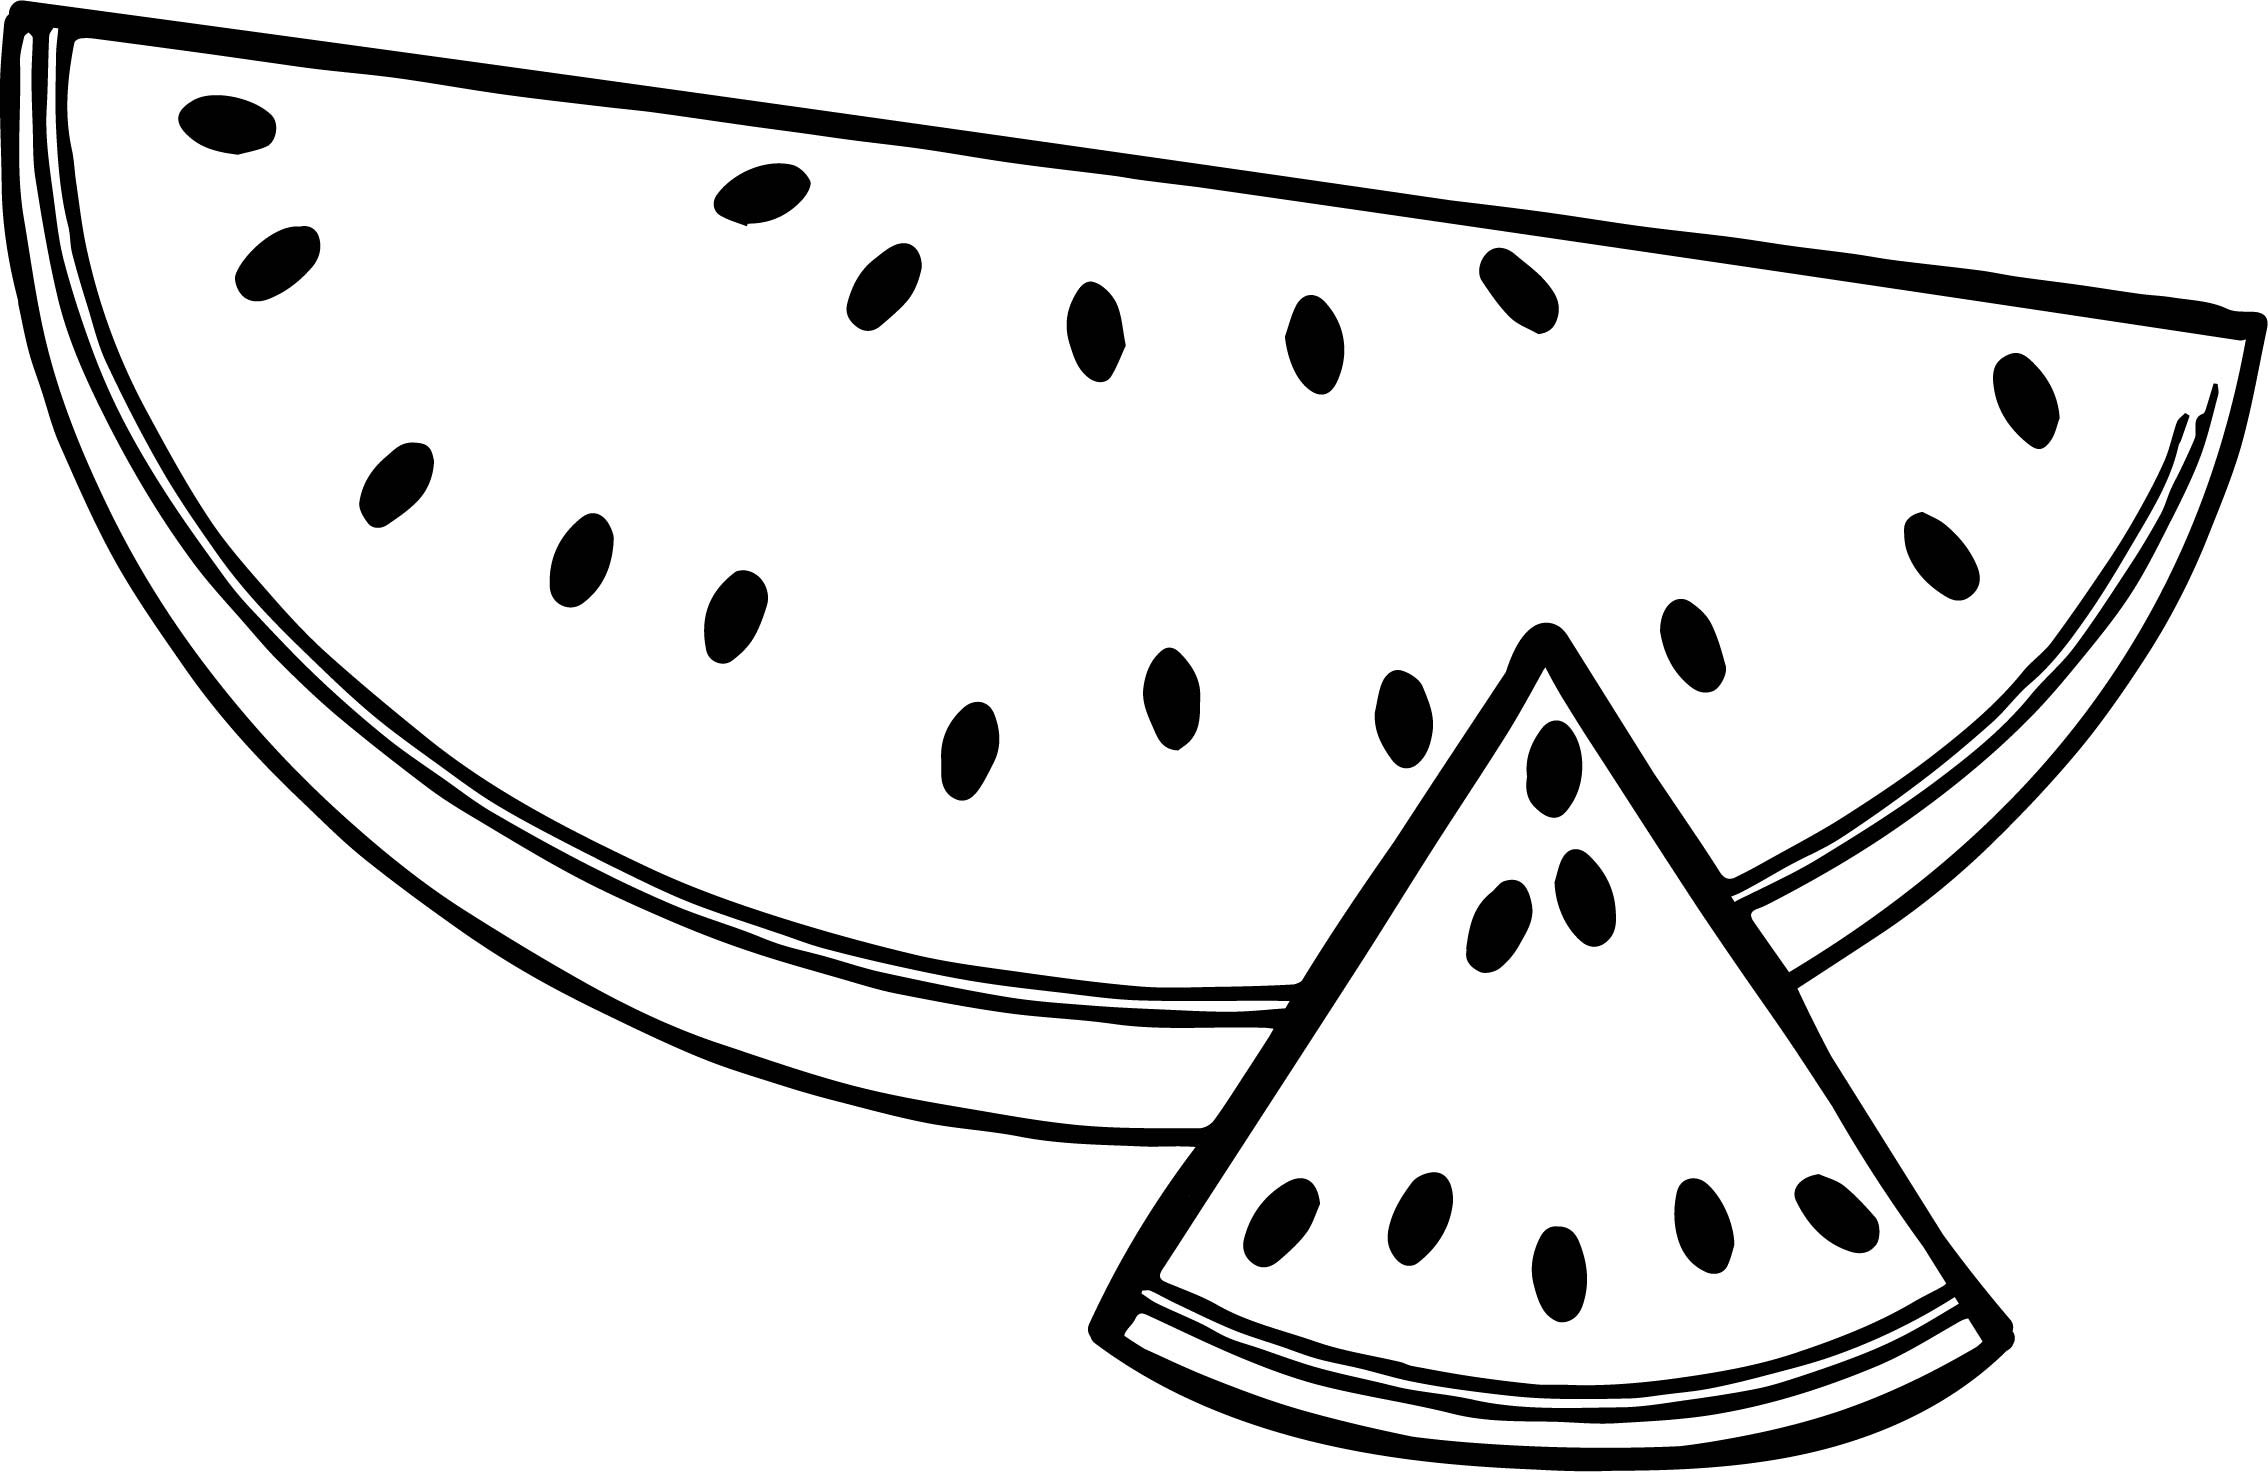 Watermelon Coloring Pages
 A Sliced Summer Watermelon Half And Triangle Coloring Page